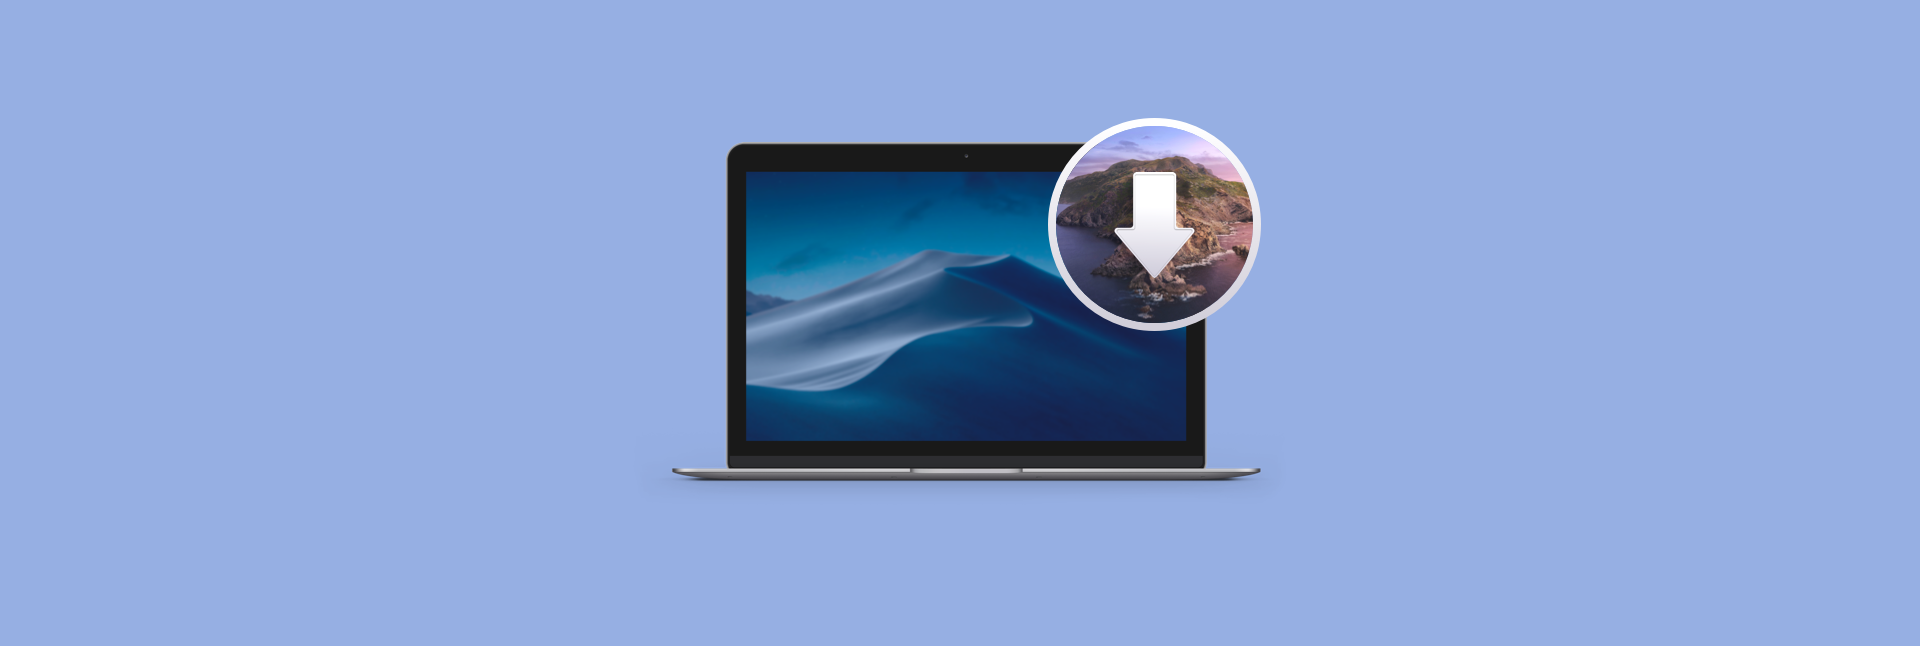 how to clear space on mac air